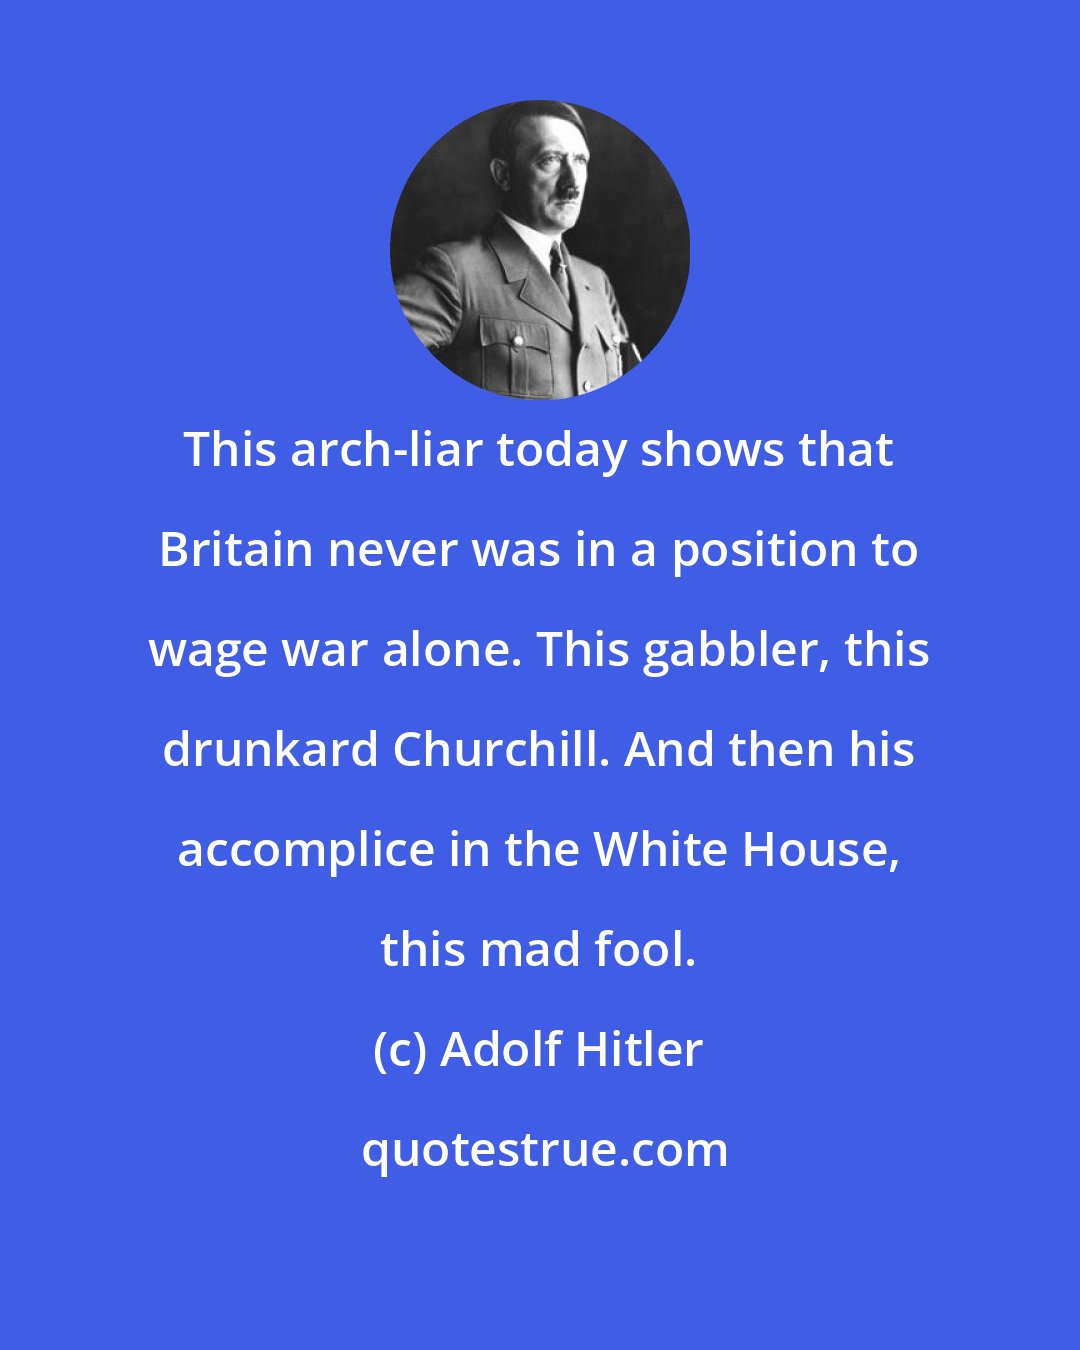 Adolf Hitler: This arch-liar today shows that Britain never was in a position to wage war alone. This gabbler, this drunkard Churchill. And then his accomplice in the White House, this mad fool.